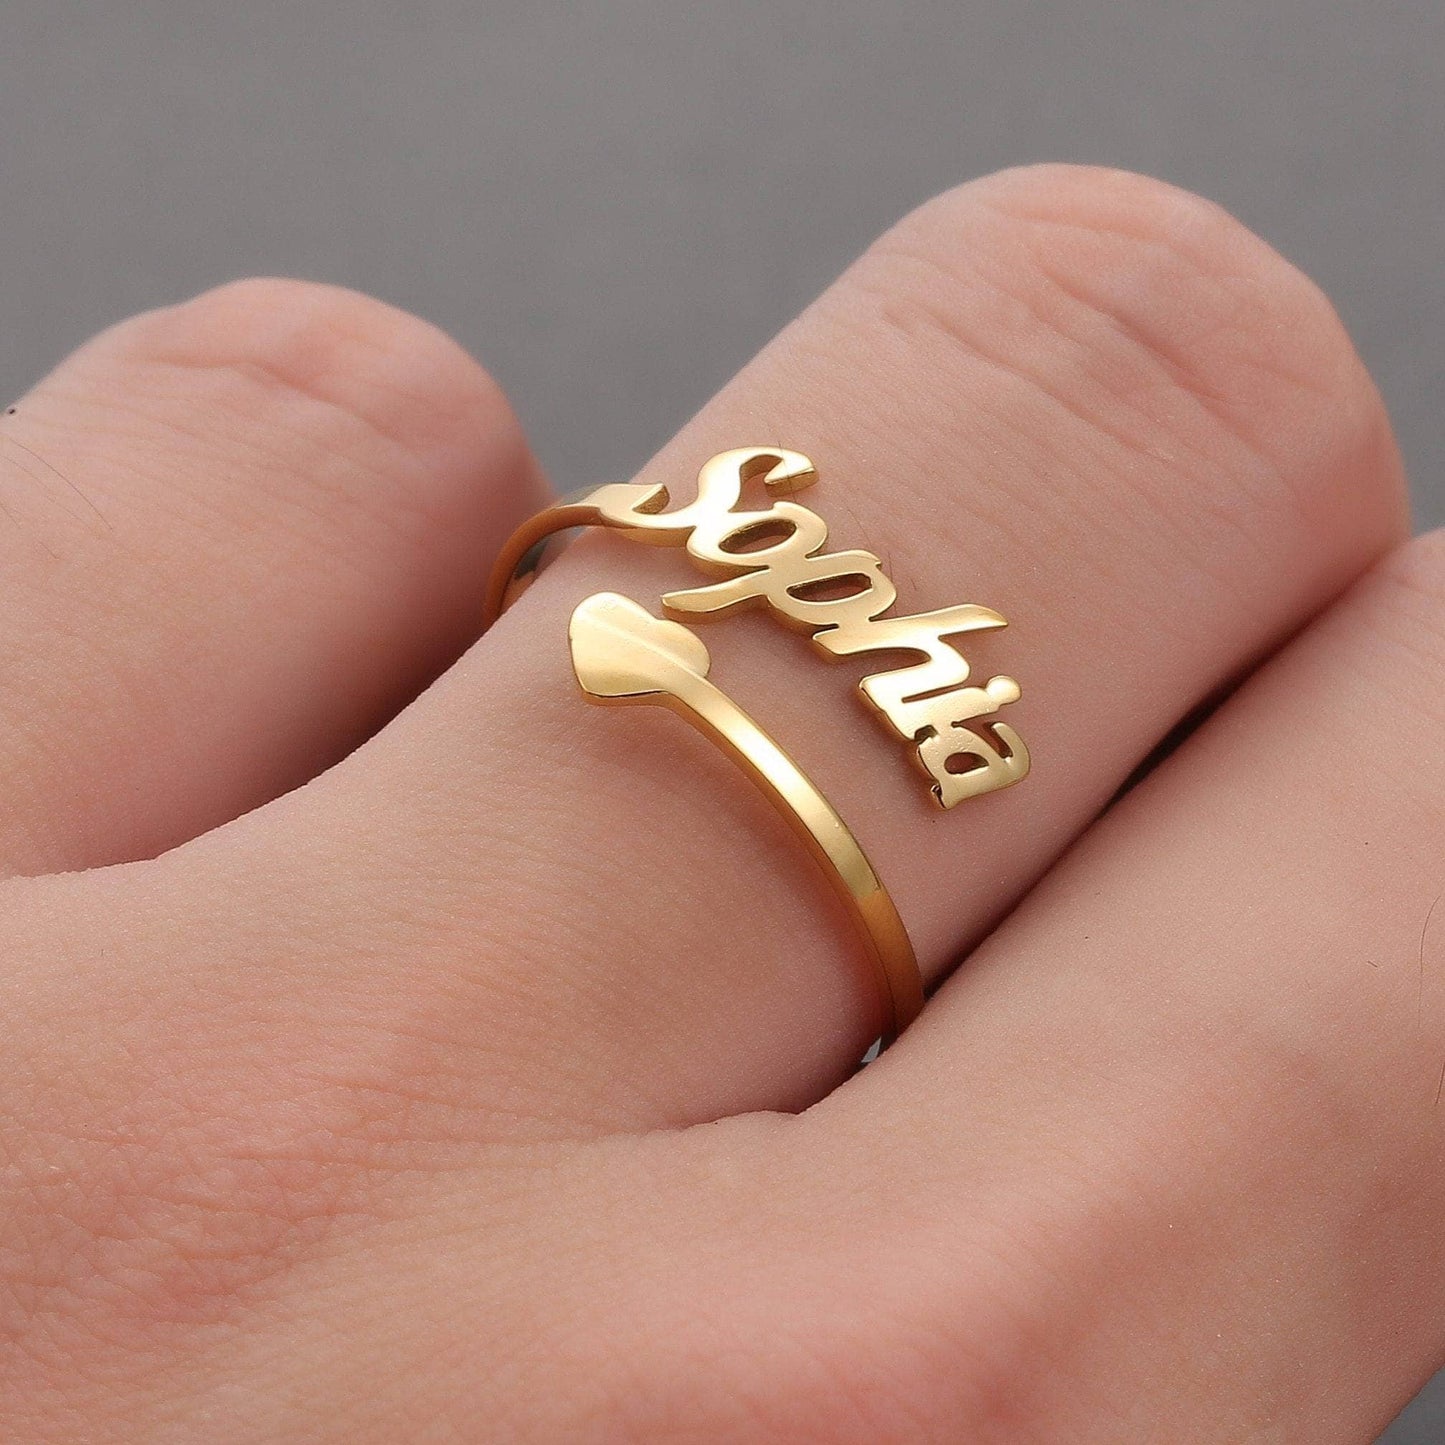 14k Solid Gold Name Ring, Personalized Ring, Custom Name Ring,personalized  Jewelry,gift for Her,jx11 - Etsy